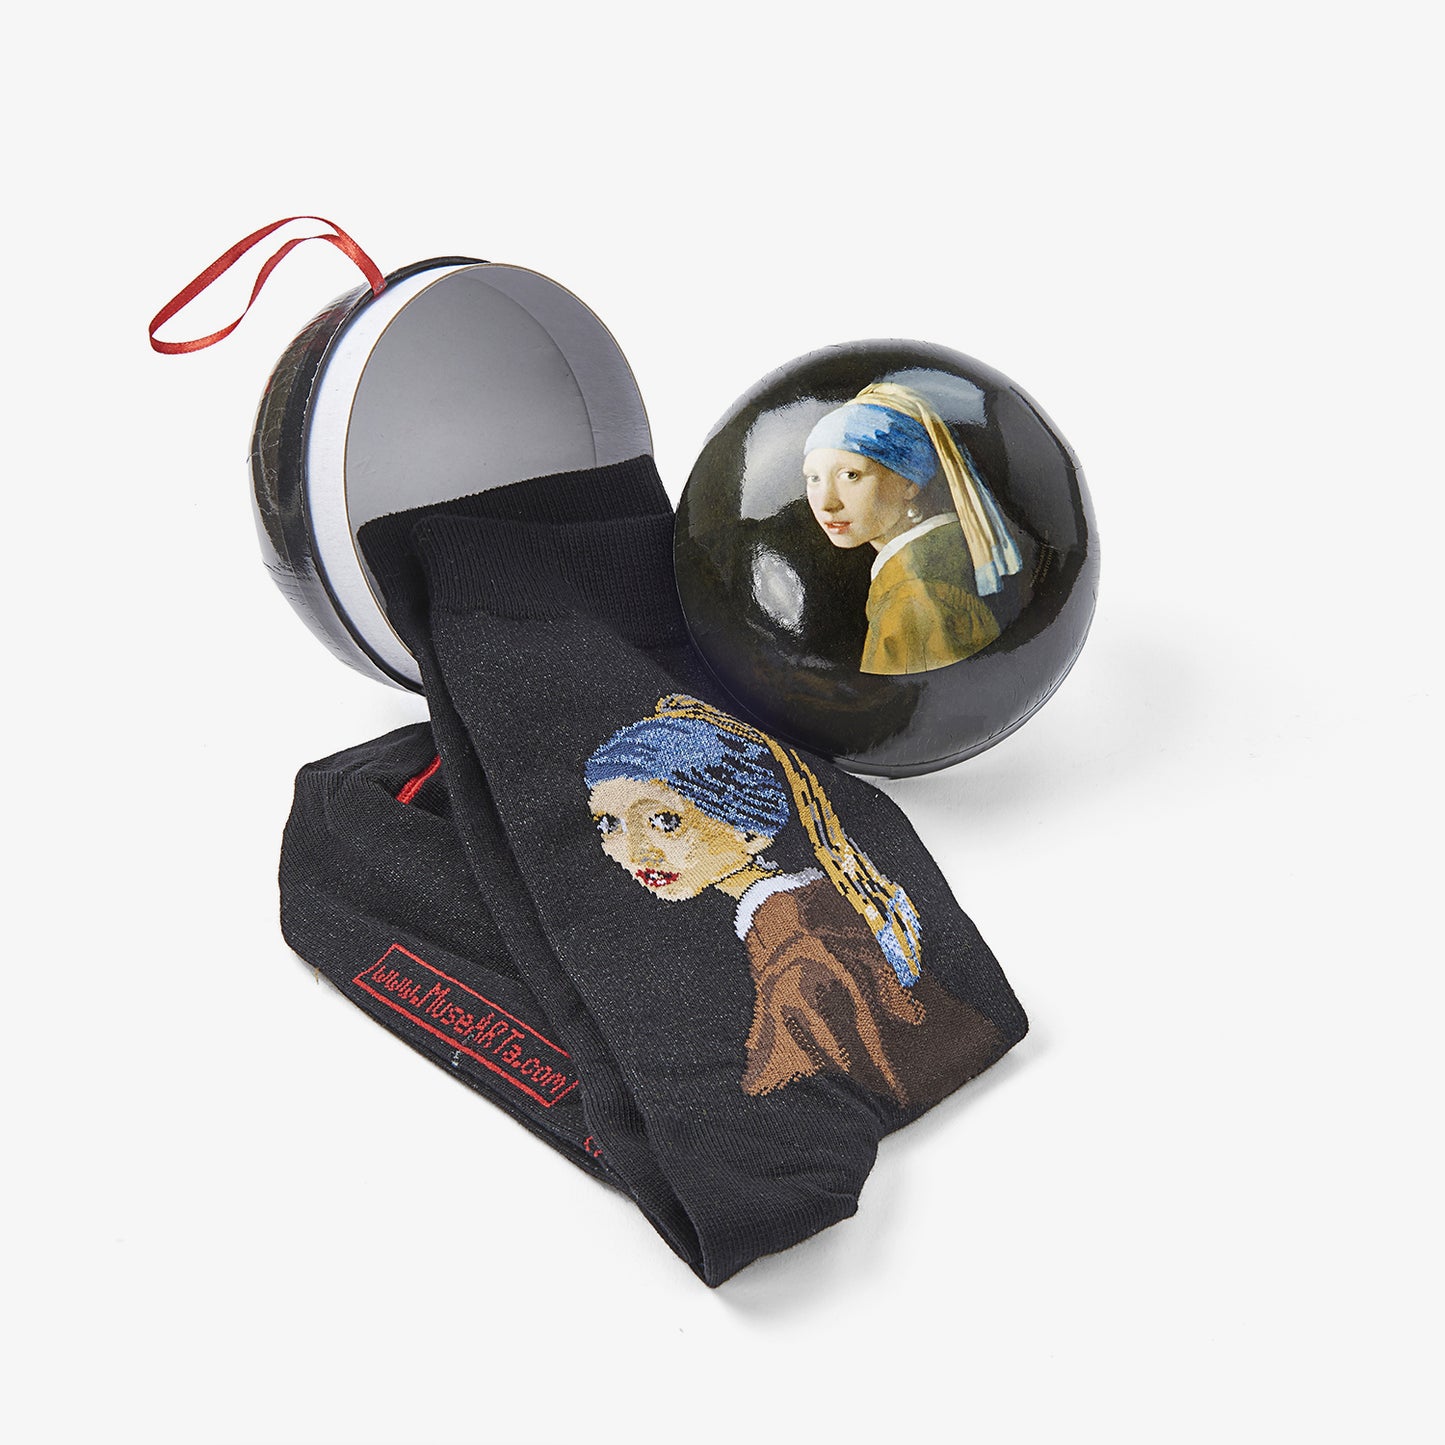 Gift ball - Jan Vermeer, The Girl with the Pearl Earring